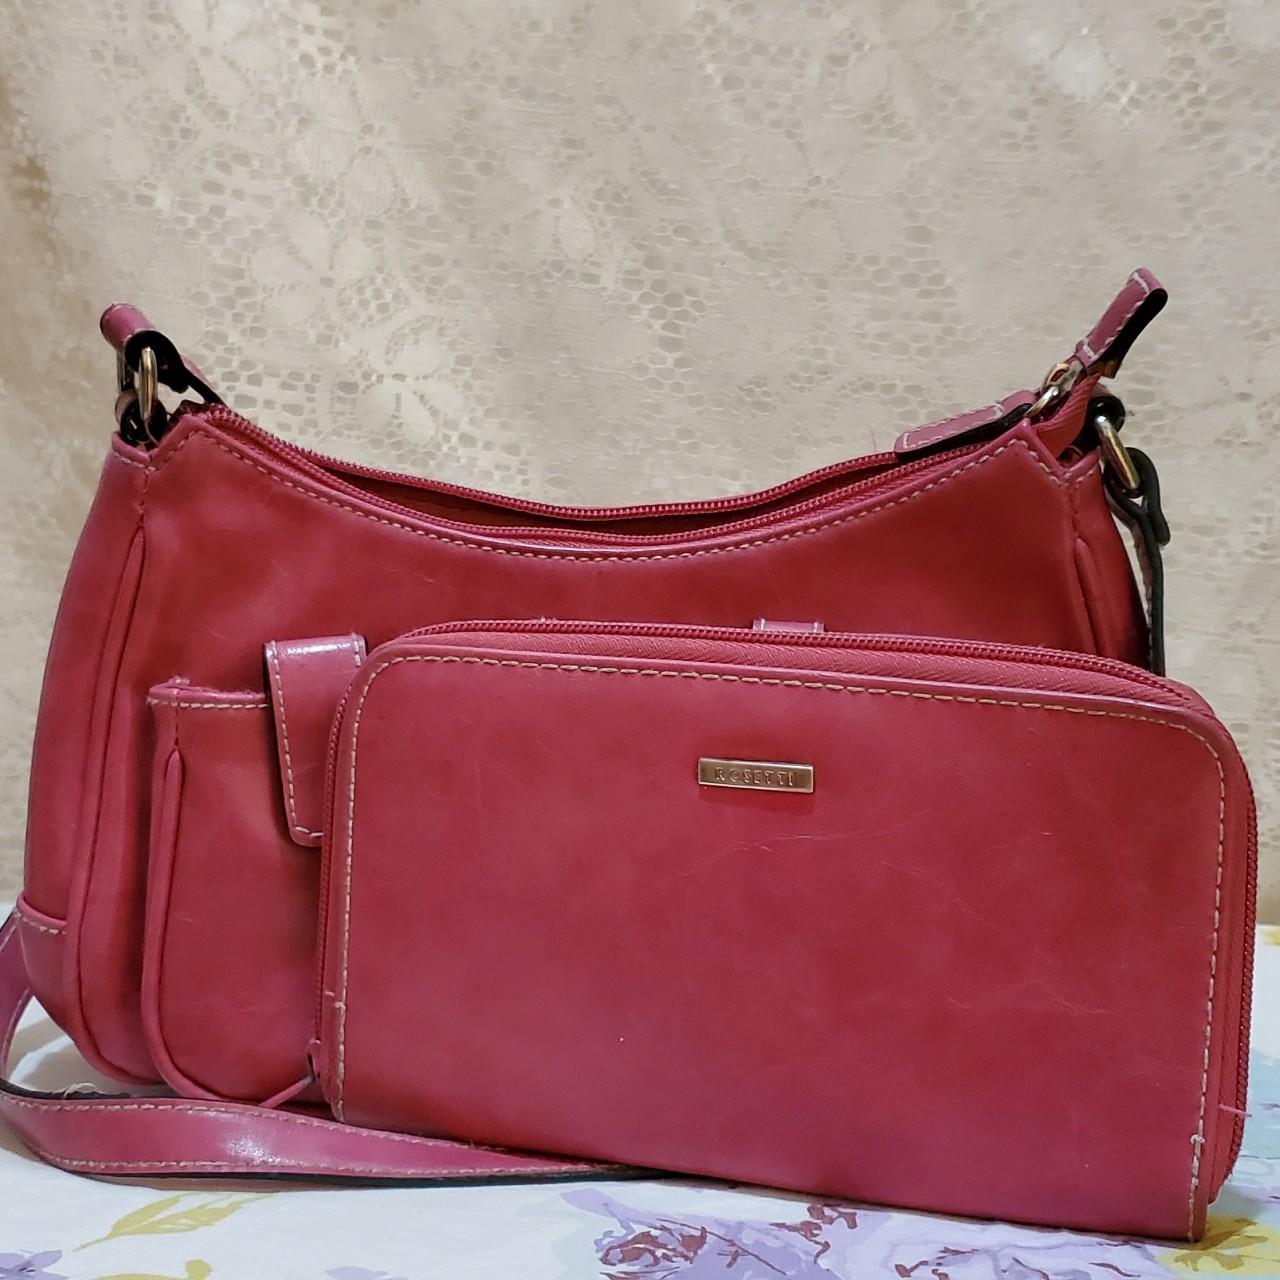 Pink Rosetti Purse With Adjustable Strap and Pockets | eBay